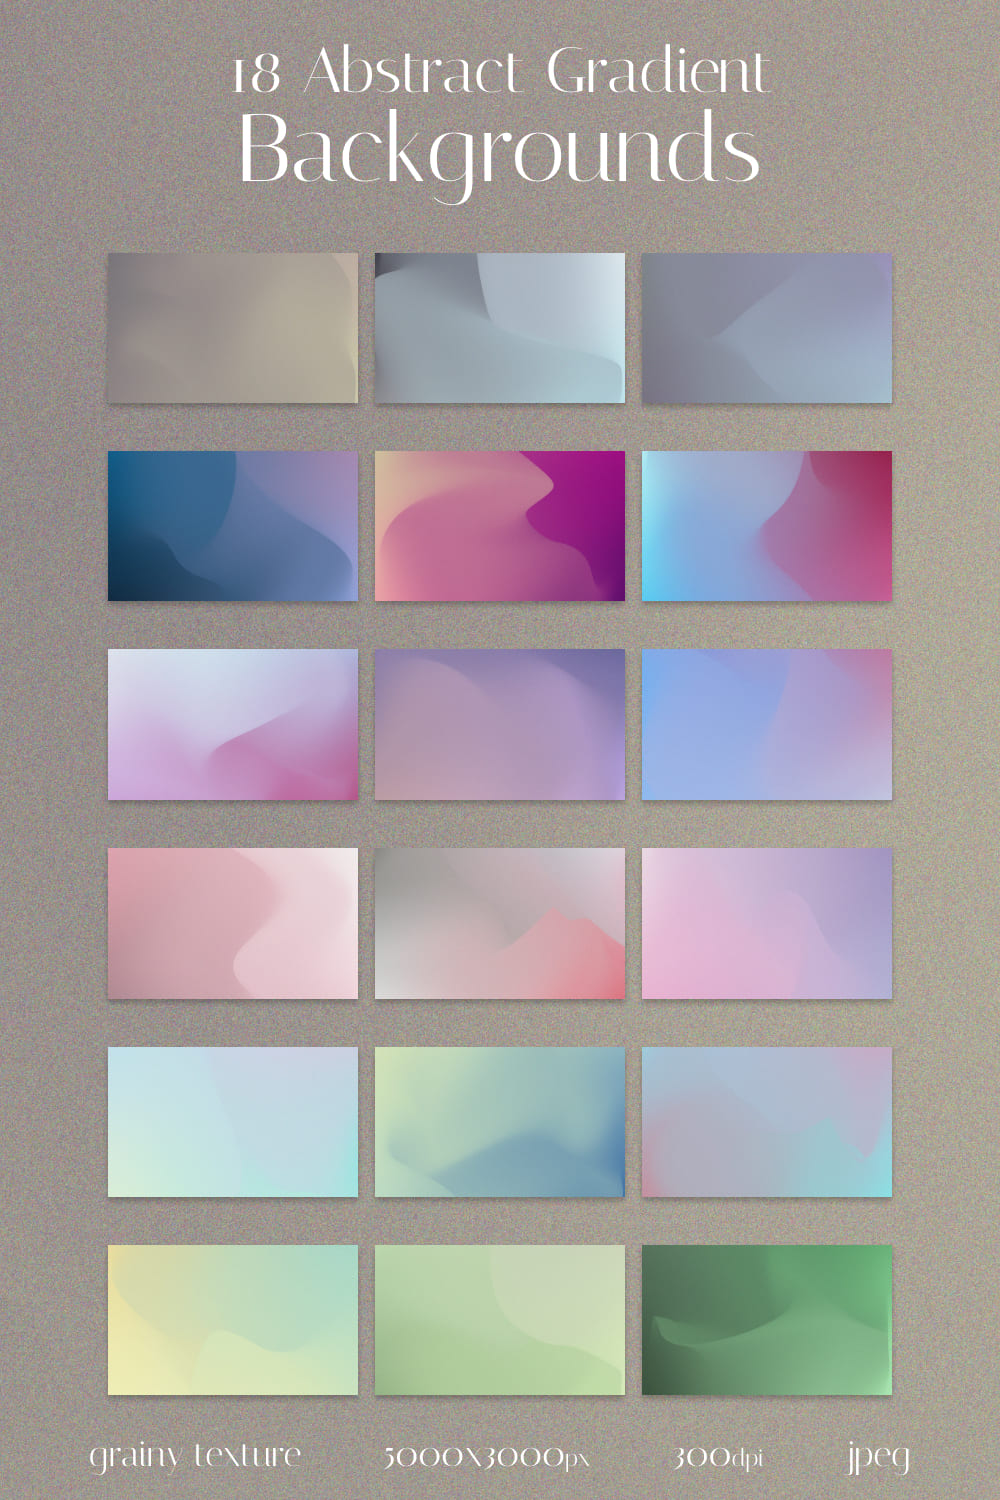 Colorful Abstract Gradient Backgrounds Design pinterest image.